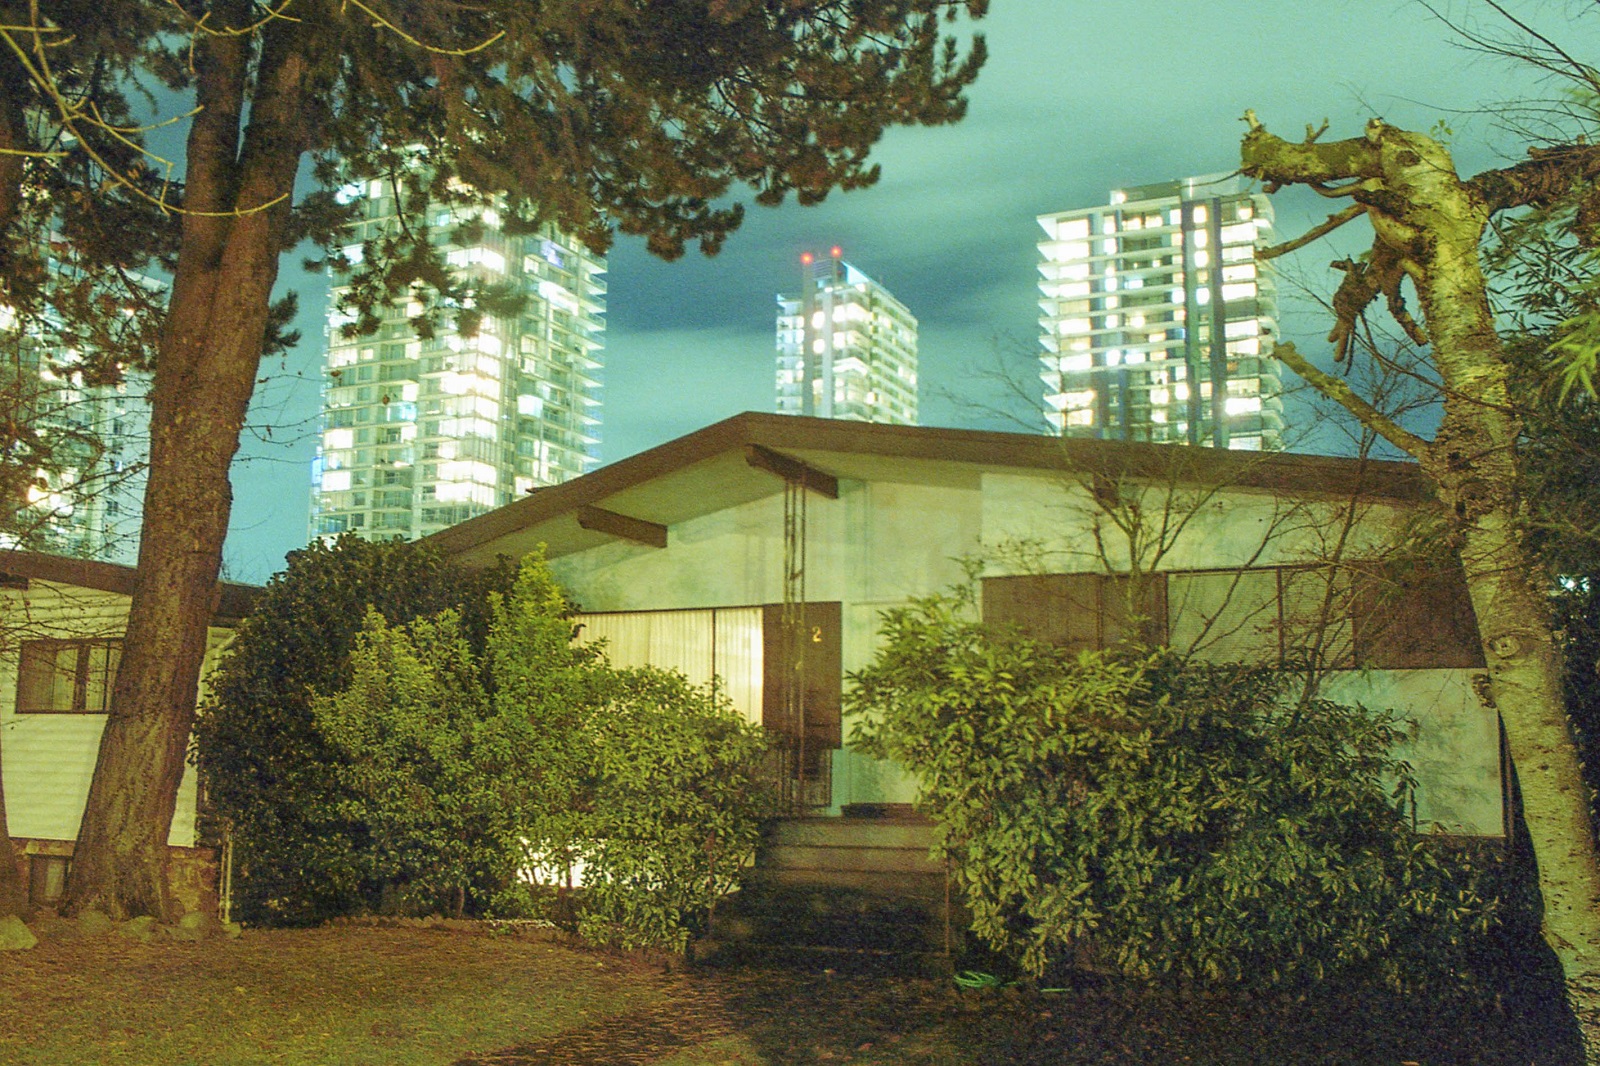 A house with lights on at night with bright towers looming behind.